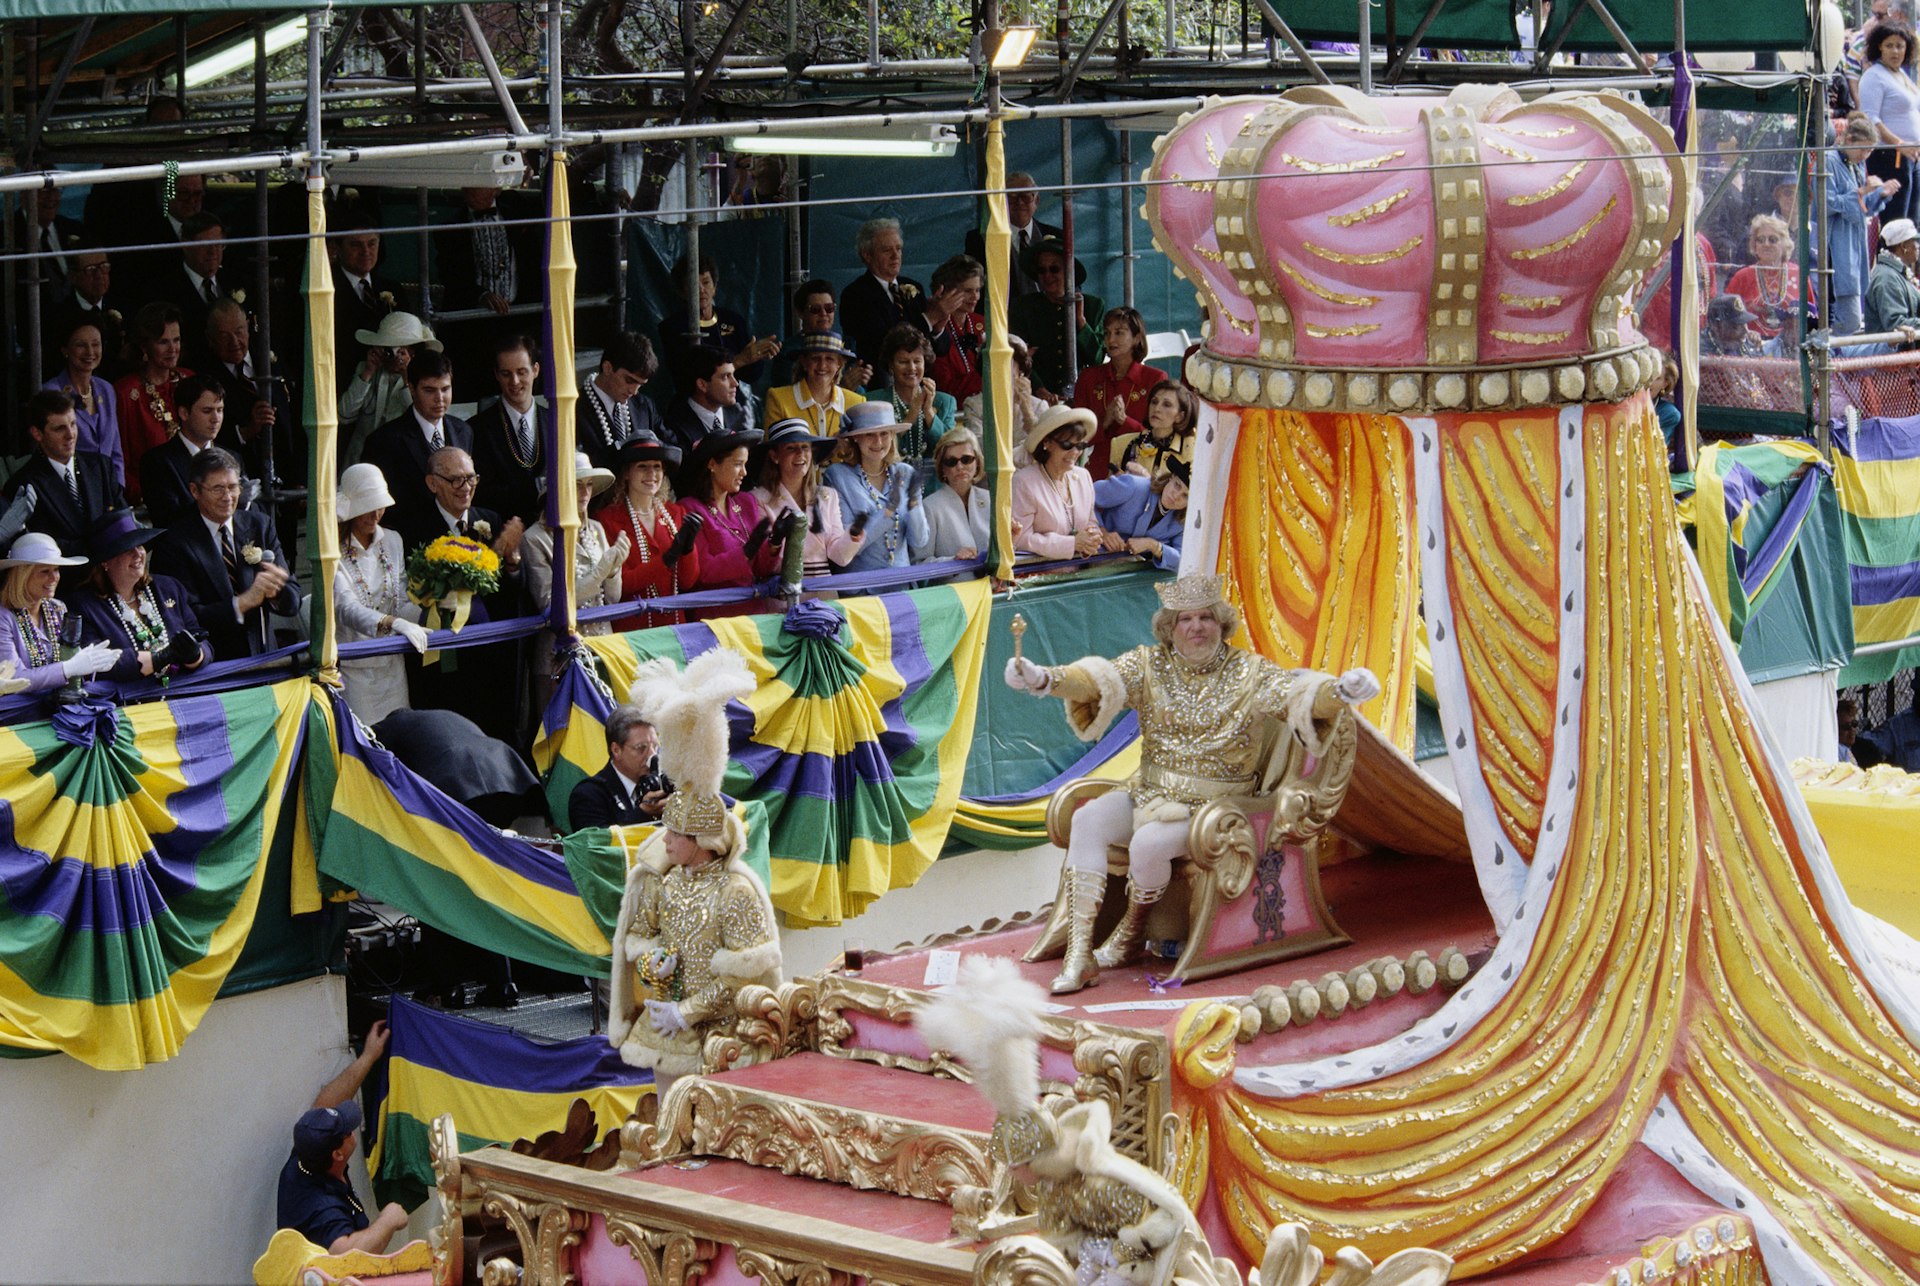 Mardi Gras parade float with Rex, King of Carnival, waving to the crowd in New Orleans, USA